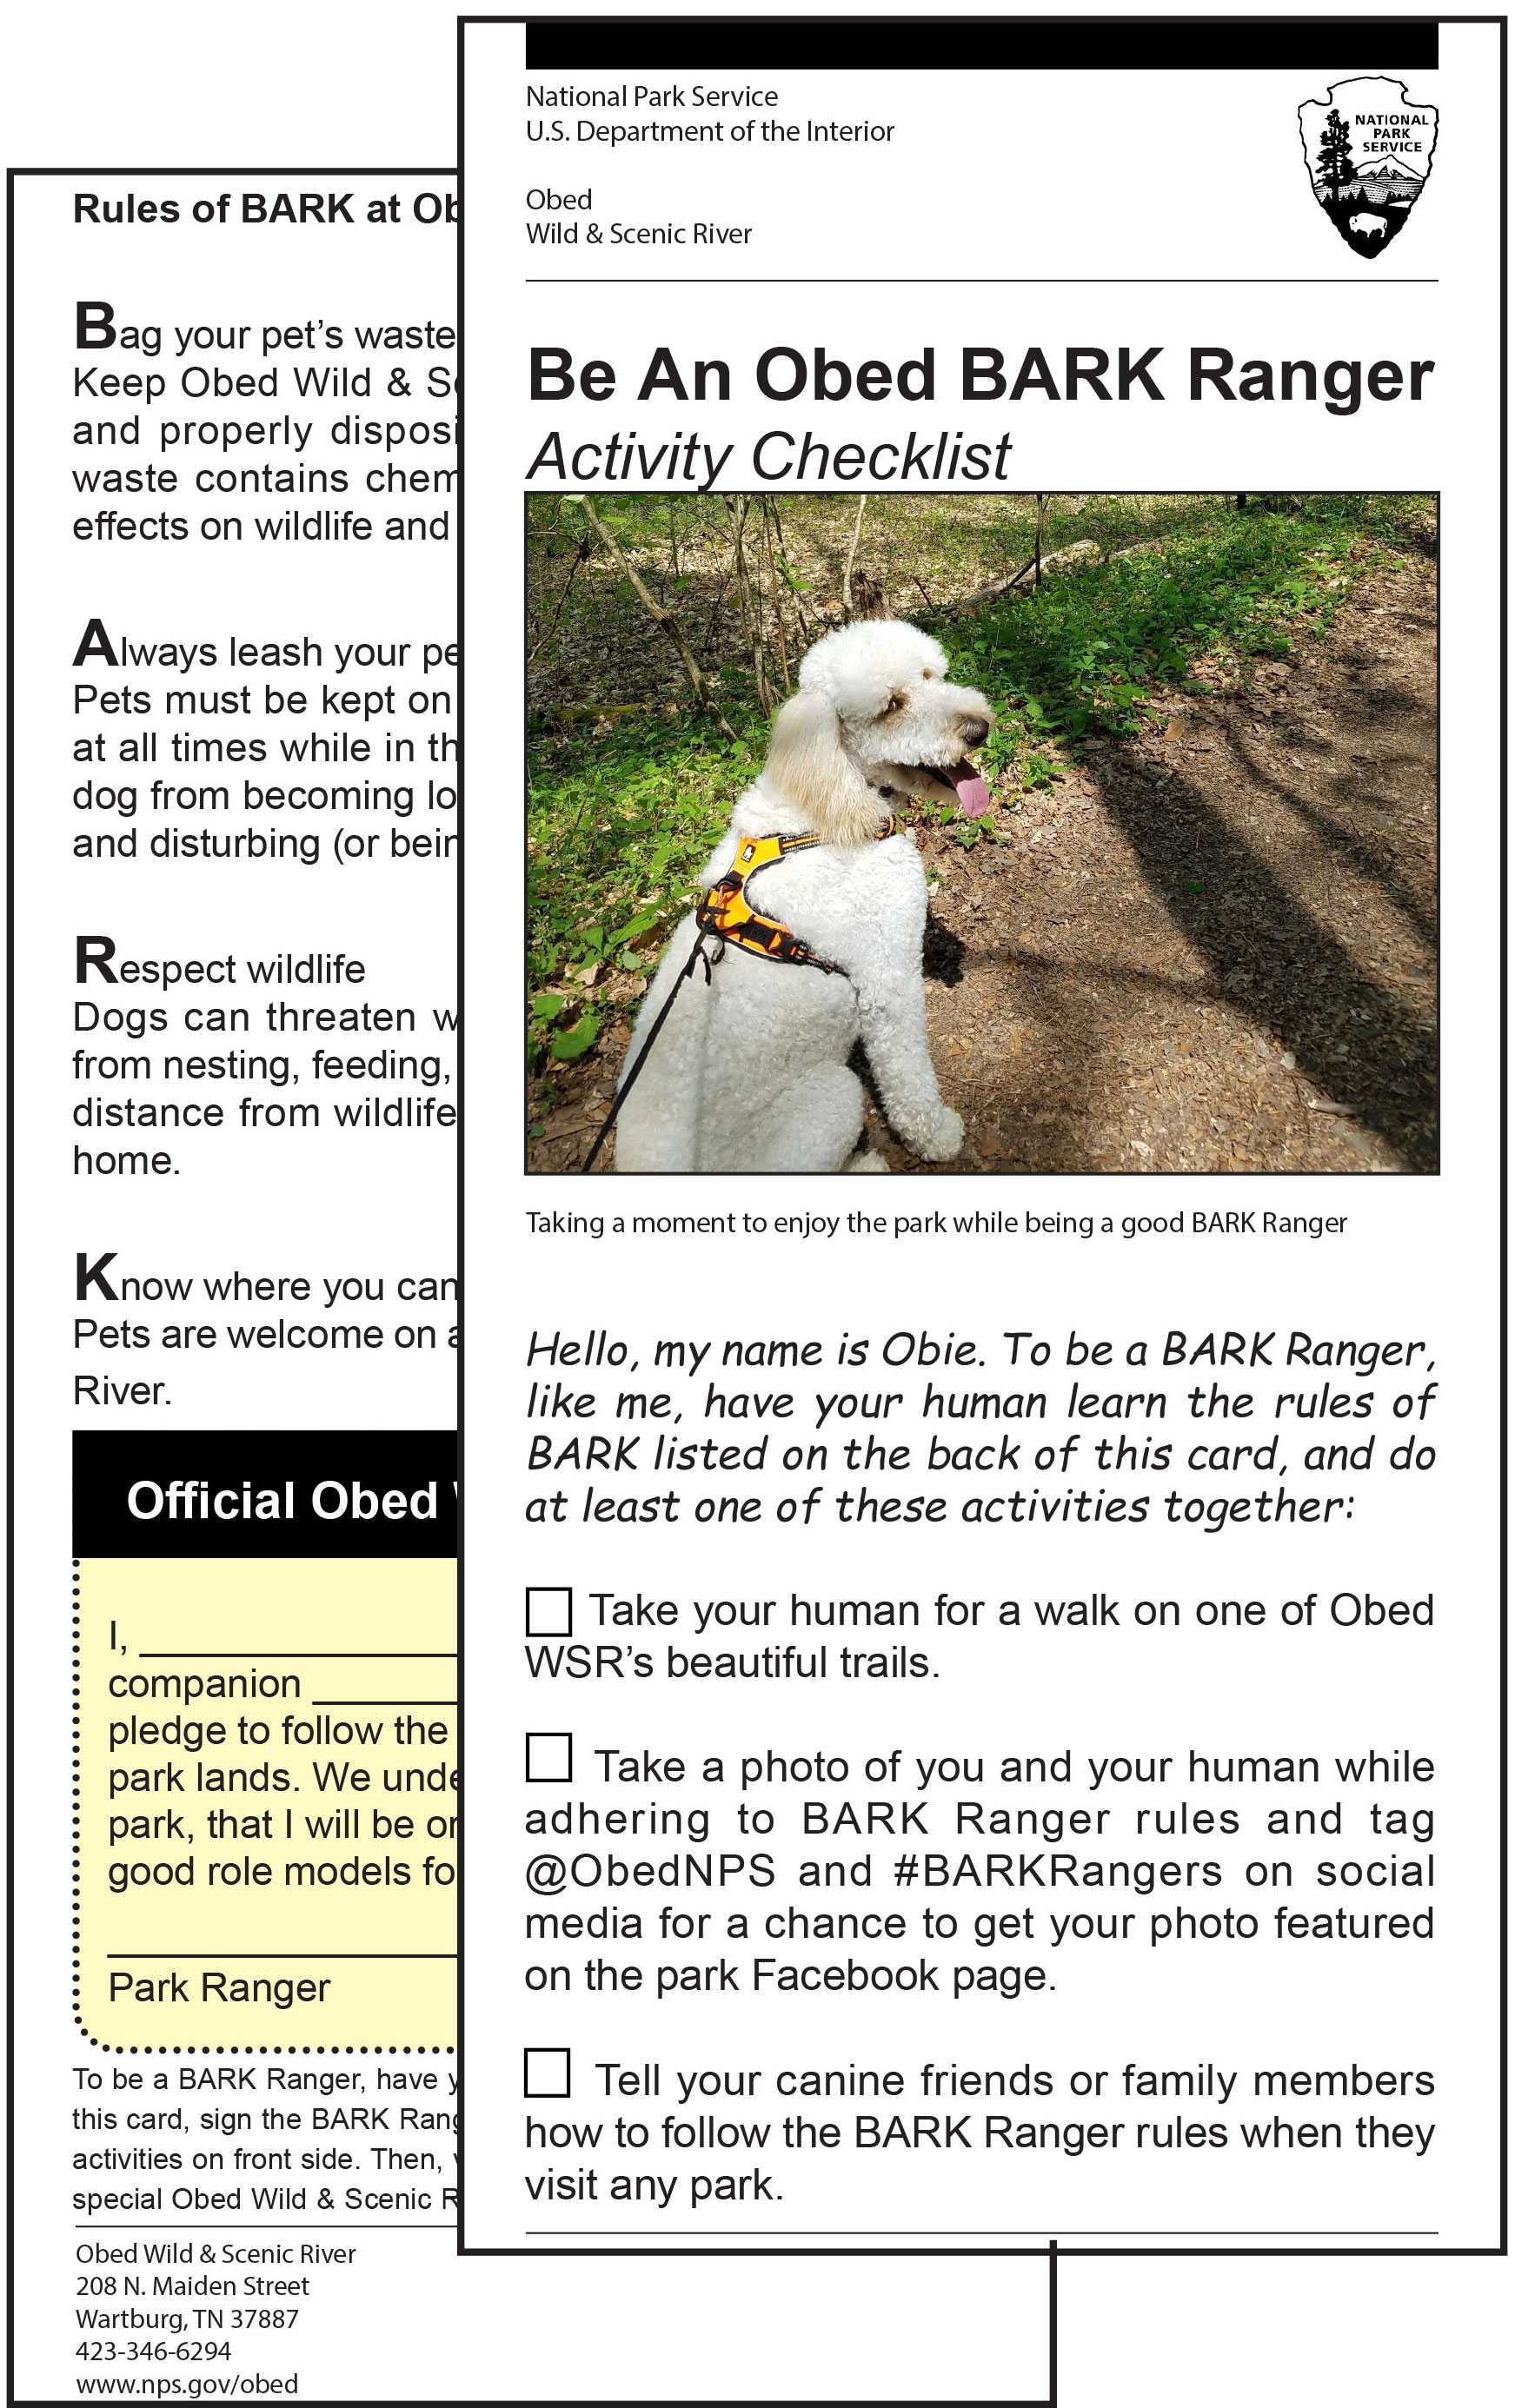 Be an Obed BARK Ranger - Obed Wild & Scenic River (U.S. National Park  Service)